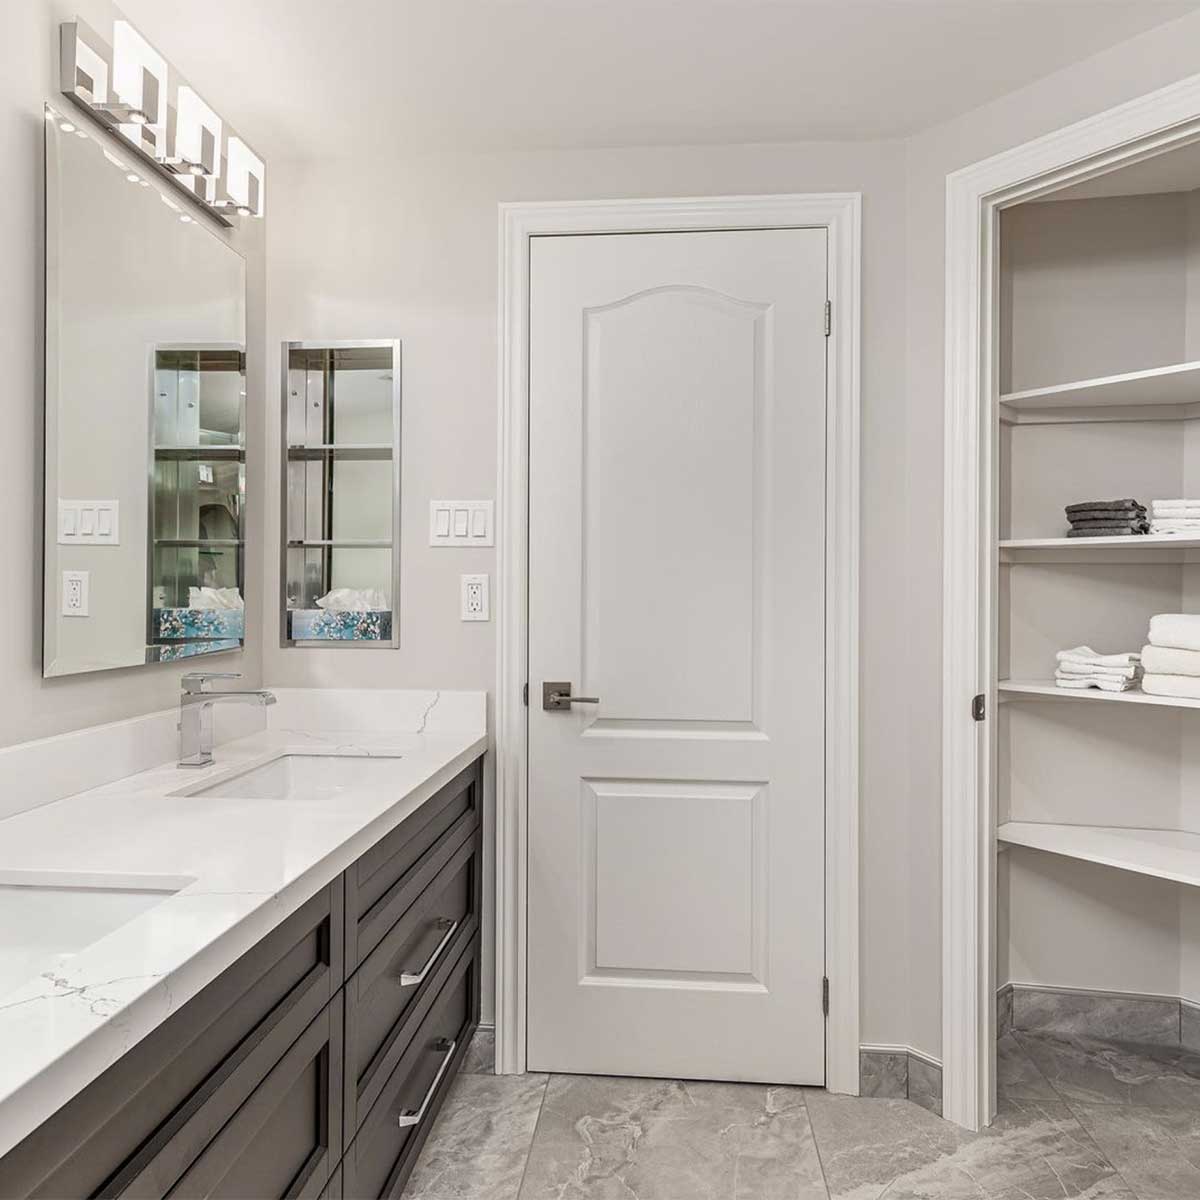 Small bathroom renovations can add big value to homes